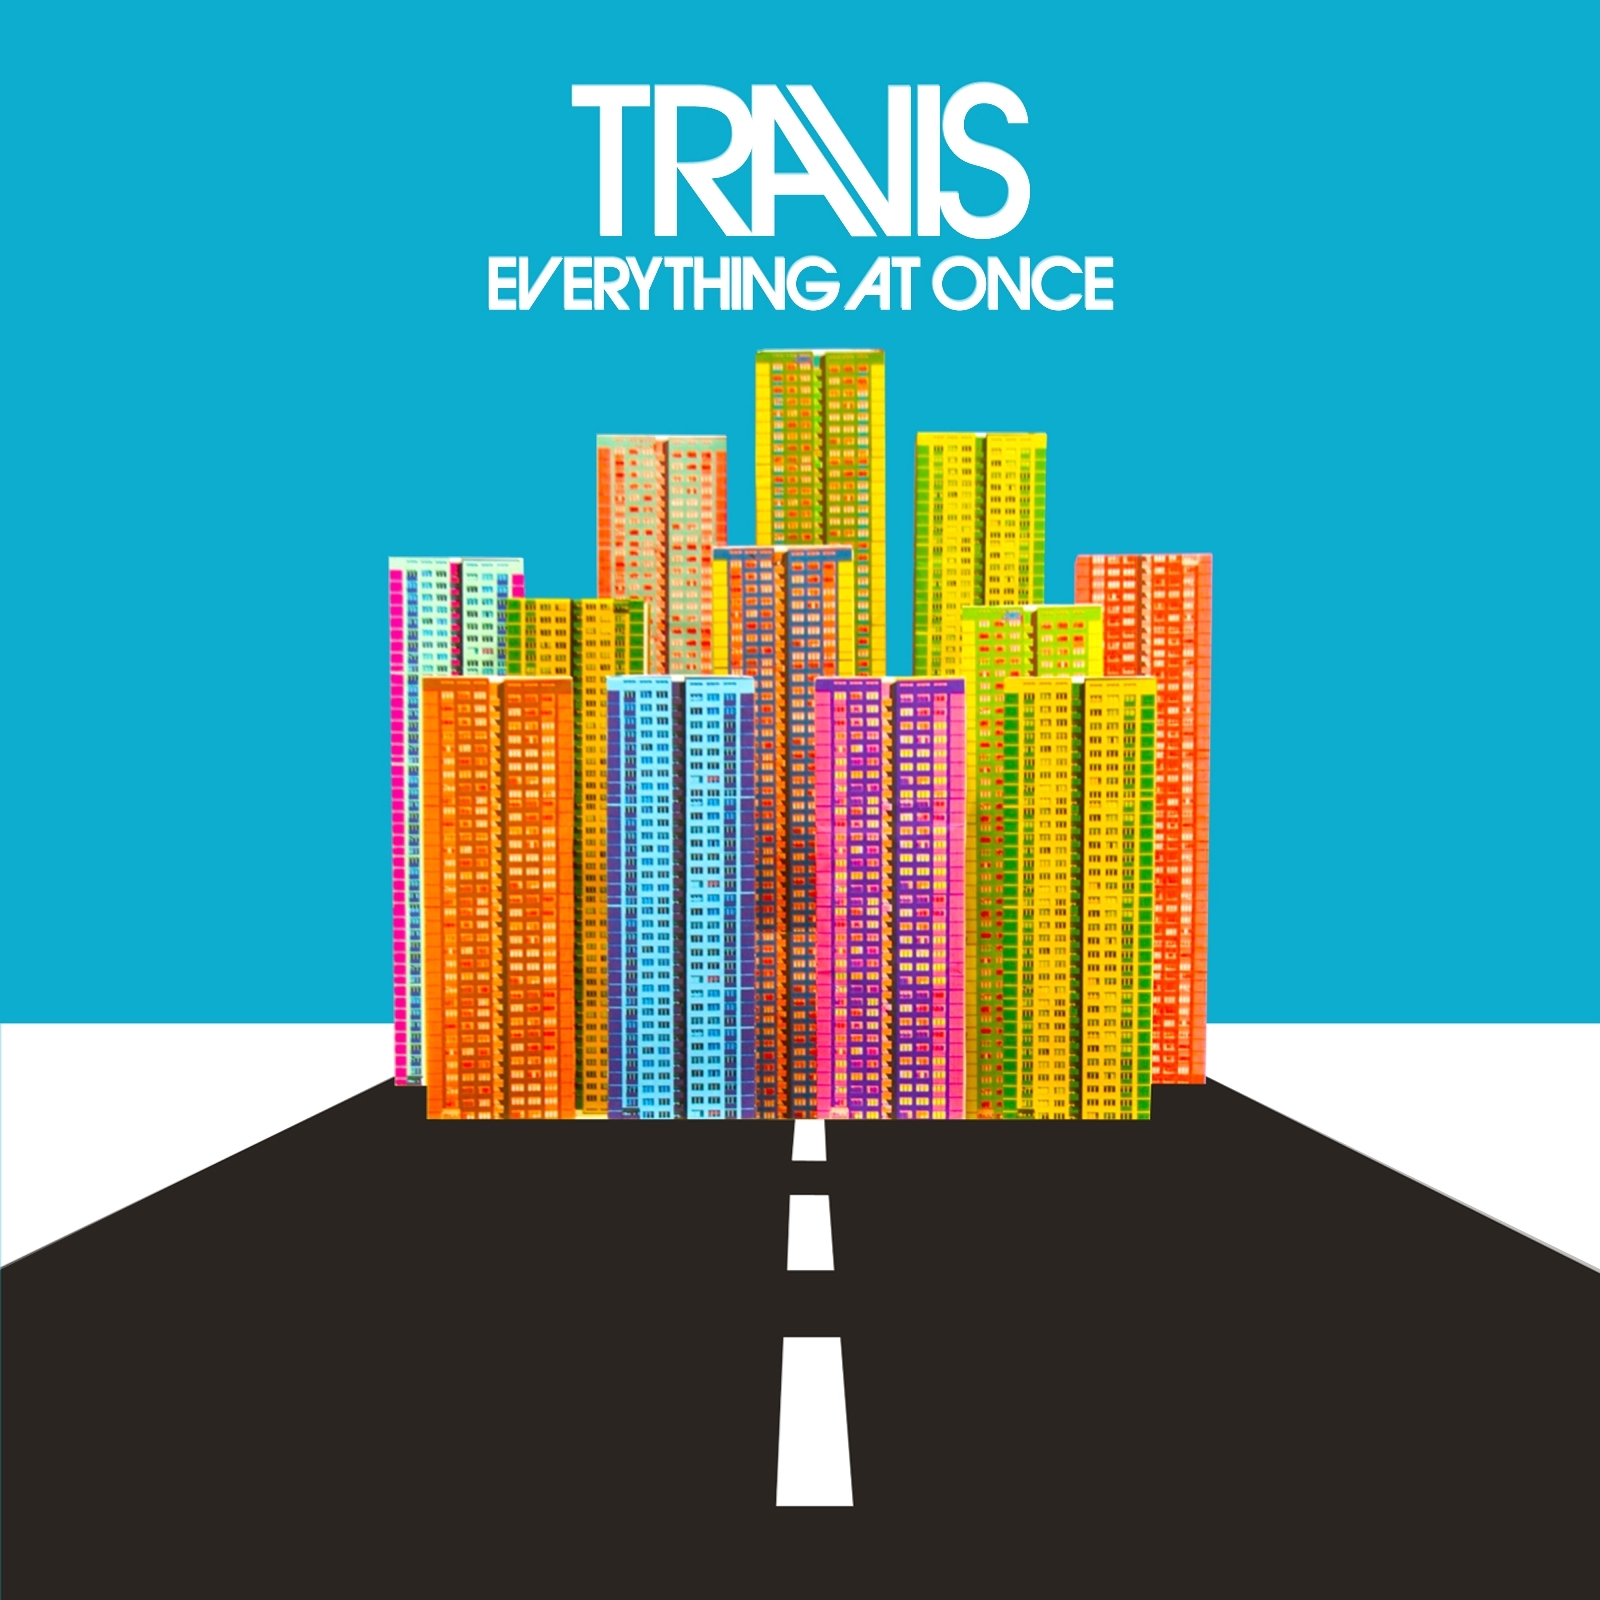 Travis - Everything At Once (2016) [Mora FLAC 24bit/96kHz]